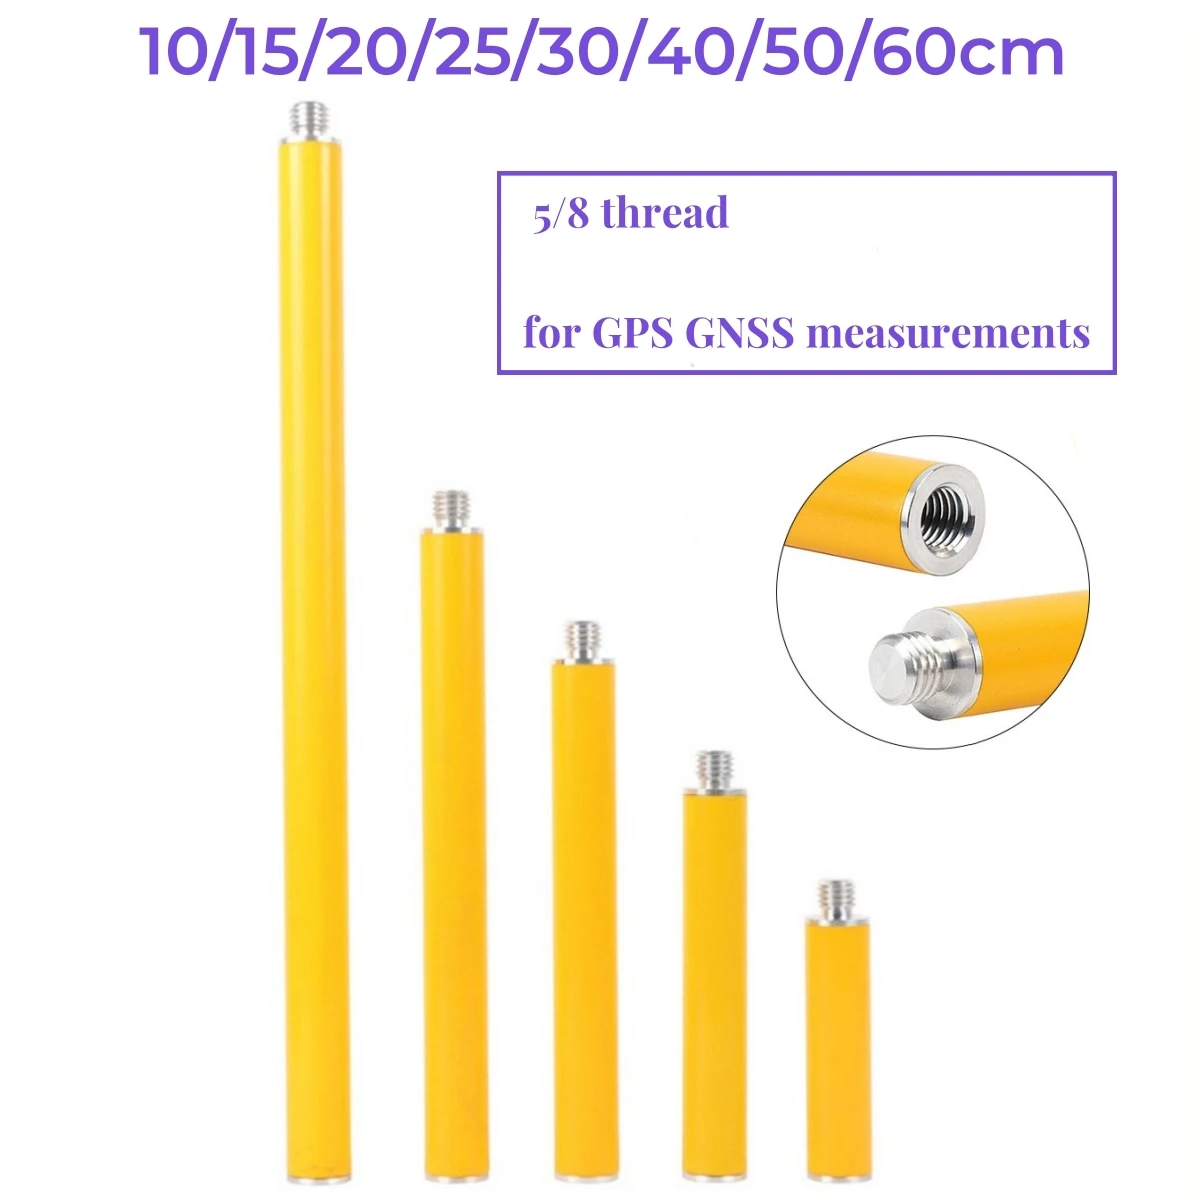 

1PCS 10-60cm 5/8 Threaded GPS/RTK Extension Rod Yellow Diameter 25 Mm GPS Surveying Pole Antenna Extend Section For GNSS